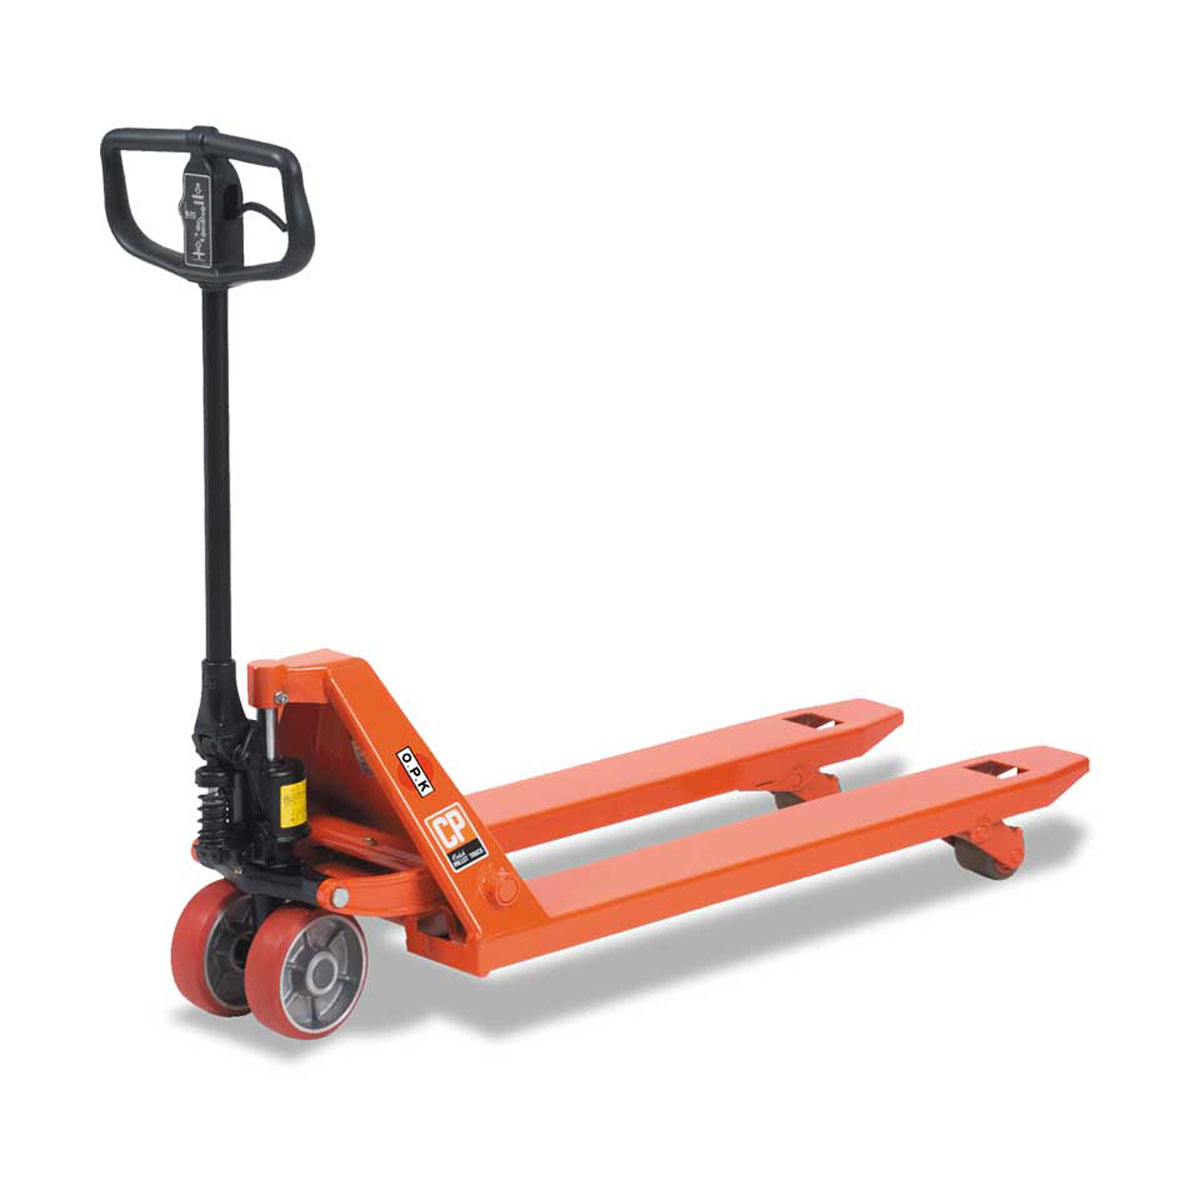 Buy 4-Way Pallet Truck - OPK  in 4-Way Pallet Trucks from OPK available at Astrolift NZ